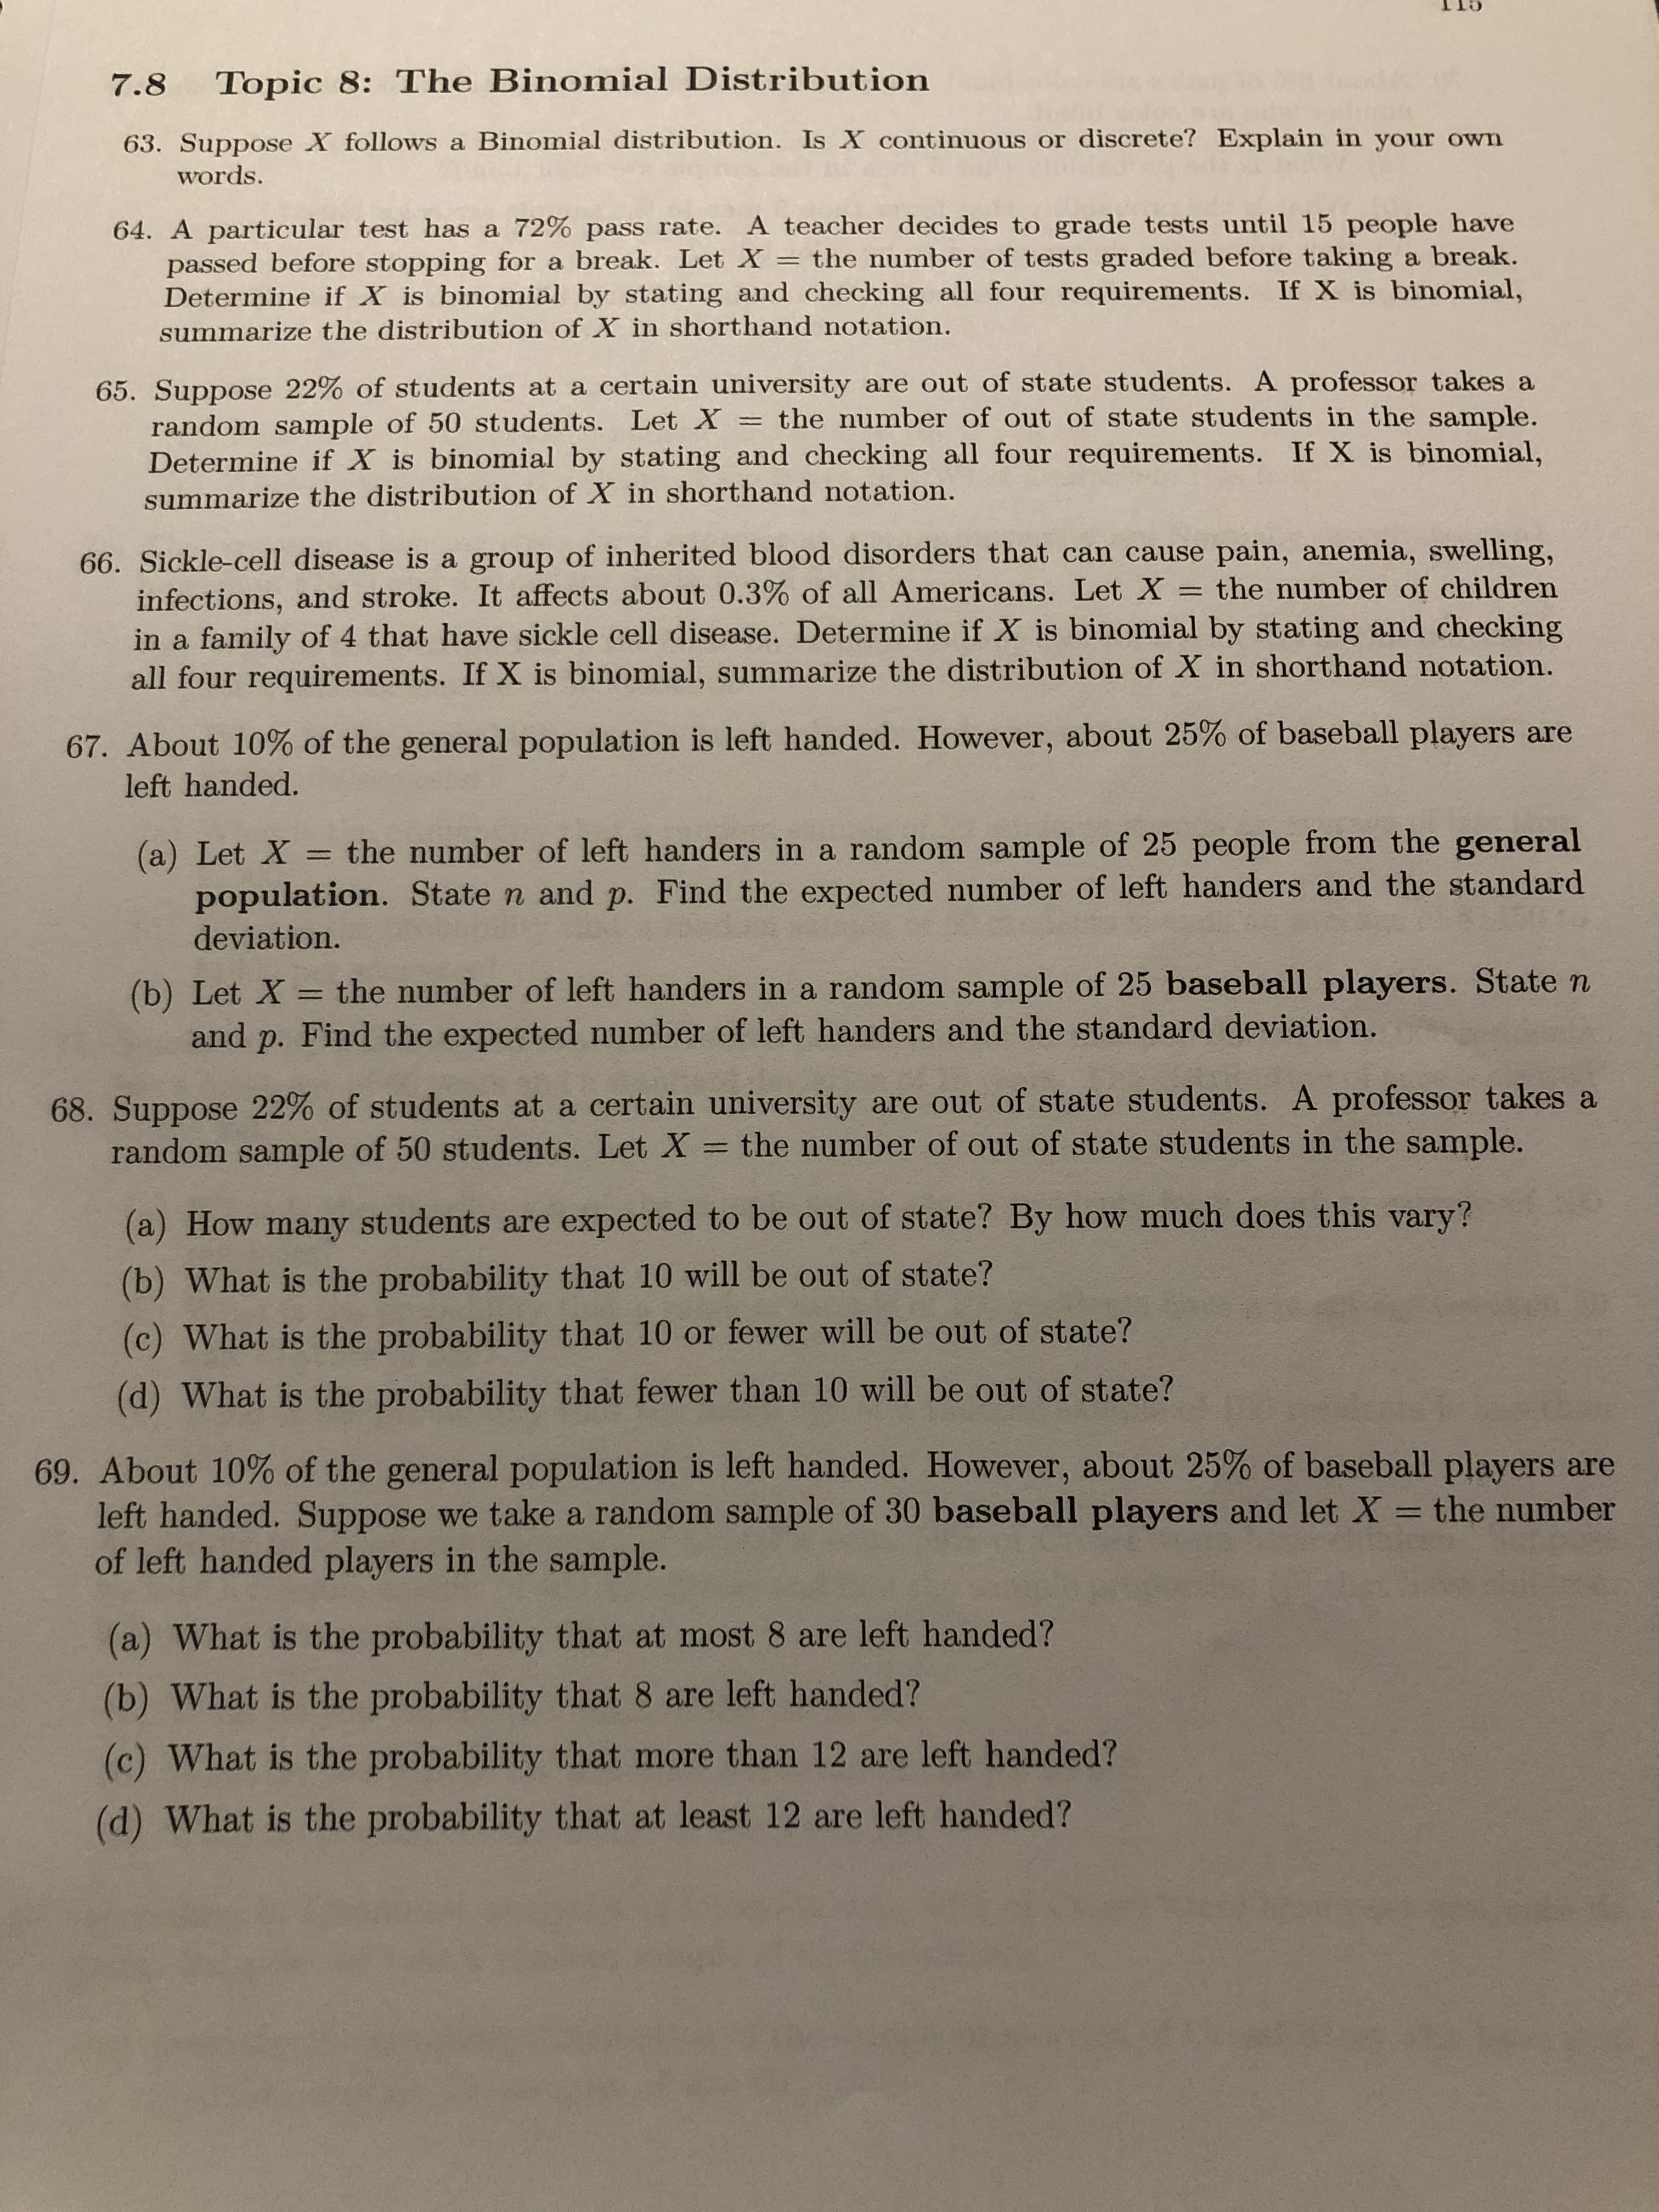 7.8
Topic 8: The Binomial Distribution
63. Suppose X follows a Binomial distribution. Is X continuous or discrete? Explain in your own
words.
64. A particular test has a 72% pass rate. A teacher decides to grade tests until 15 people have
passed before stopping for a break. Let X = the number of tests graded before taking a break.
Determine if X is binomial by stating and checking all four requirements. If X is binomial,
summarize the distribution of X in shorthand notation.
65. Suppose 22% of students at a certain university are out of state students. A professor takes a
random sample of 50 students. Let X = the number of out of state students in the sample.
Determine if X is binomial by stating and checking all four requirements. If X is binomial,
summarize the distribution of X in shorthand notation.
66. Sickle-cell disease is a group of inherited blood disorders that can cause pain, anemia, swelling,
infections, and stroke. It affects about 0.3% of all Americans. Let X = the number of children
in a family of 4 that have sickle cell disease. Determine if X is binomial by stating and checking
all four requirements. If X is binomial, summarize the distribution of X in shorthand notation.
67. About 10% of the general population is left handed. However, about 25% of baseball players are
left handed.
(a) Let X
population. State n and p. Find the expected number of left handers and the standard
the number of left handers in a random sample of 25 people from the general
deviation.
(b) Let X = the number of left handers in a random sample of 25 baseball players. State n
and p. Find the expected number of left handers and the standard deviation.
68. Suppose 22% of students at a certain university are out of state students. A professor takes a
random sample of 50 students. Let X the number of out of state students in the sample.
(a) How many students are expected to be out of state? By how much does this vary?
(b) What is the probability that 10 will be out of state?
(c) What is the probability that 10 or fewer will be out of state?
(d) What is the probability that fewer than 10 will be out of state?
69. About 10% of the general population is left handed. However, about 25% of baseball players are
left handed. Suppose we take a random sample of 30 baseball players and let X = the number
of left handed players in the sample.
(a) What is the probability that at most 8 are left handed?
(b) What is the probability that 8 are left handed?
(c) What is the probability that more than 12 are left handed?
(d) What is the probability that at least 12 are left handed?
